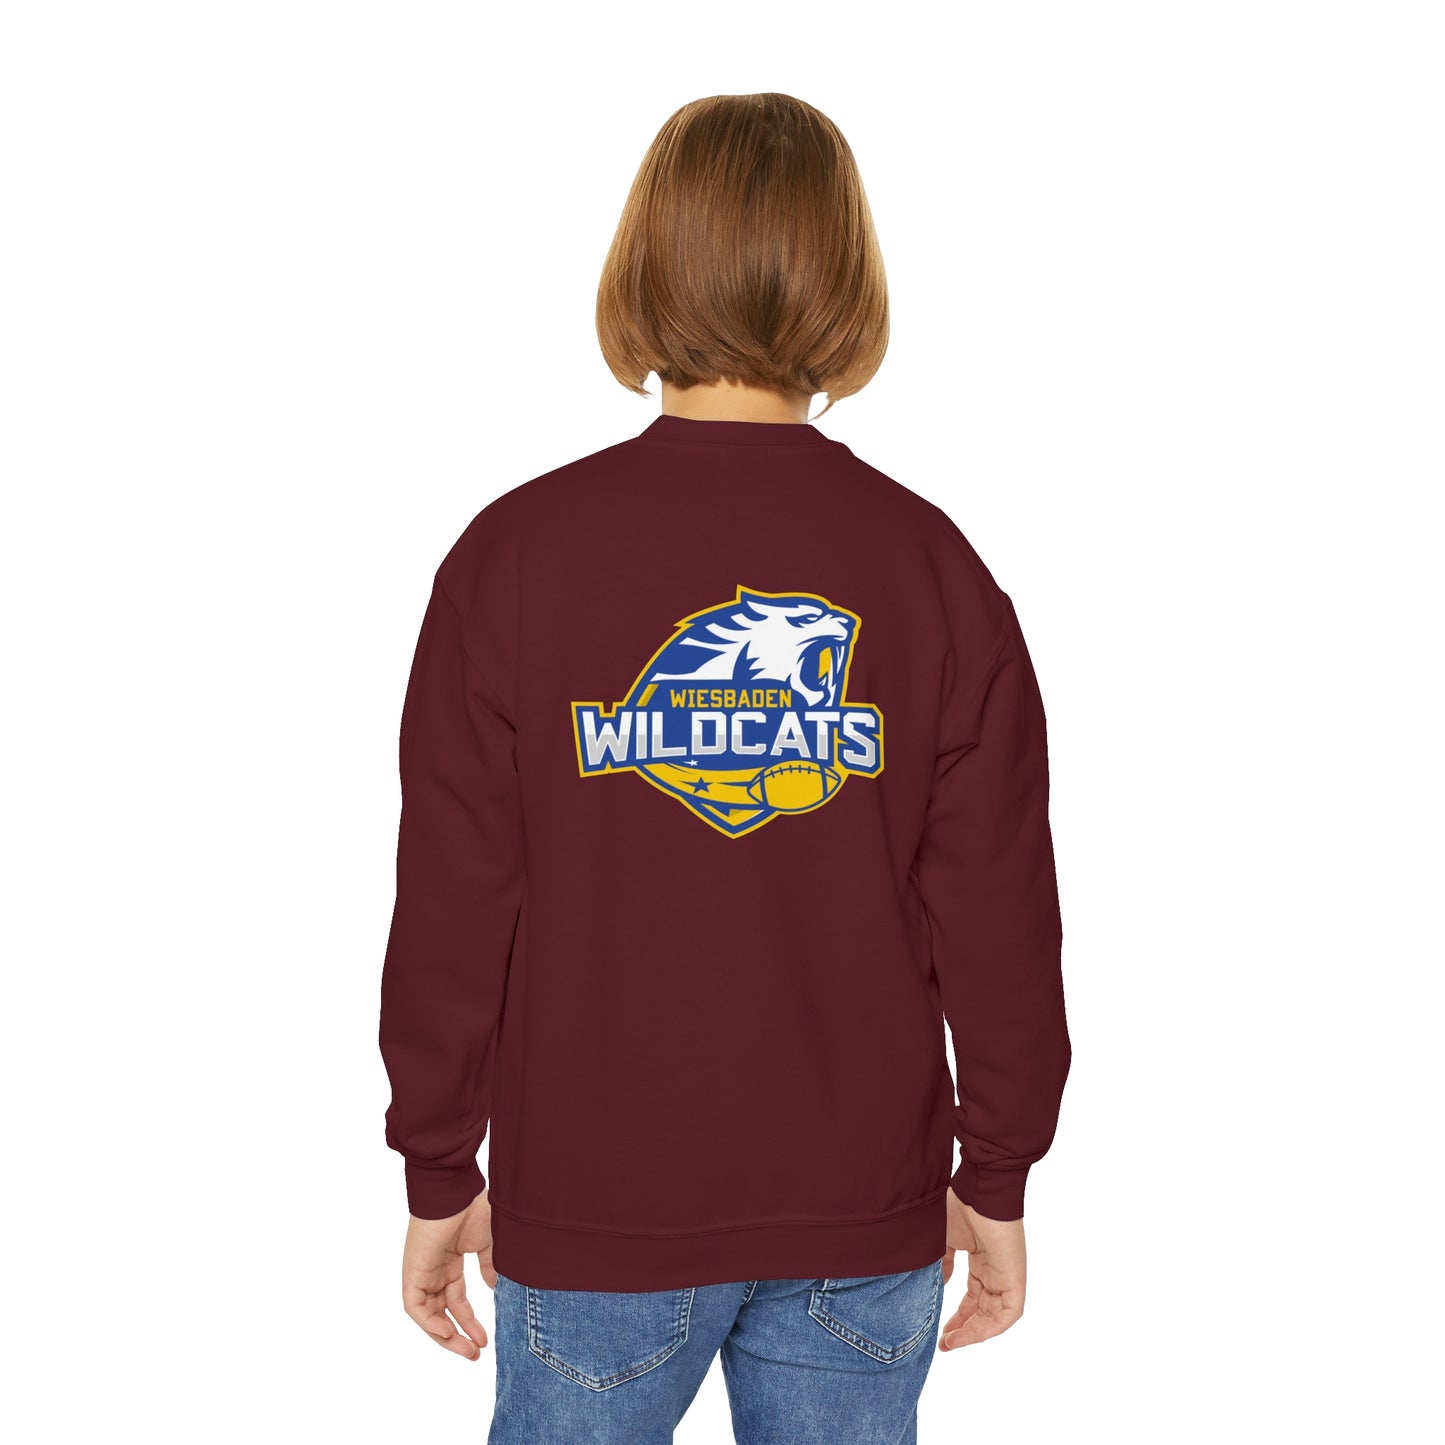 Wildcats (Front and Back) - Youth Crewneck Sweatshirt